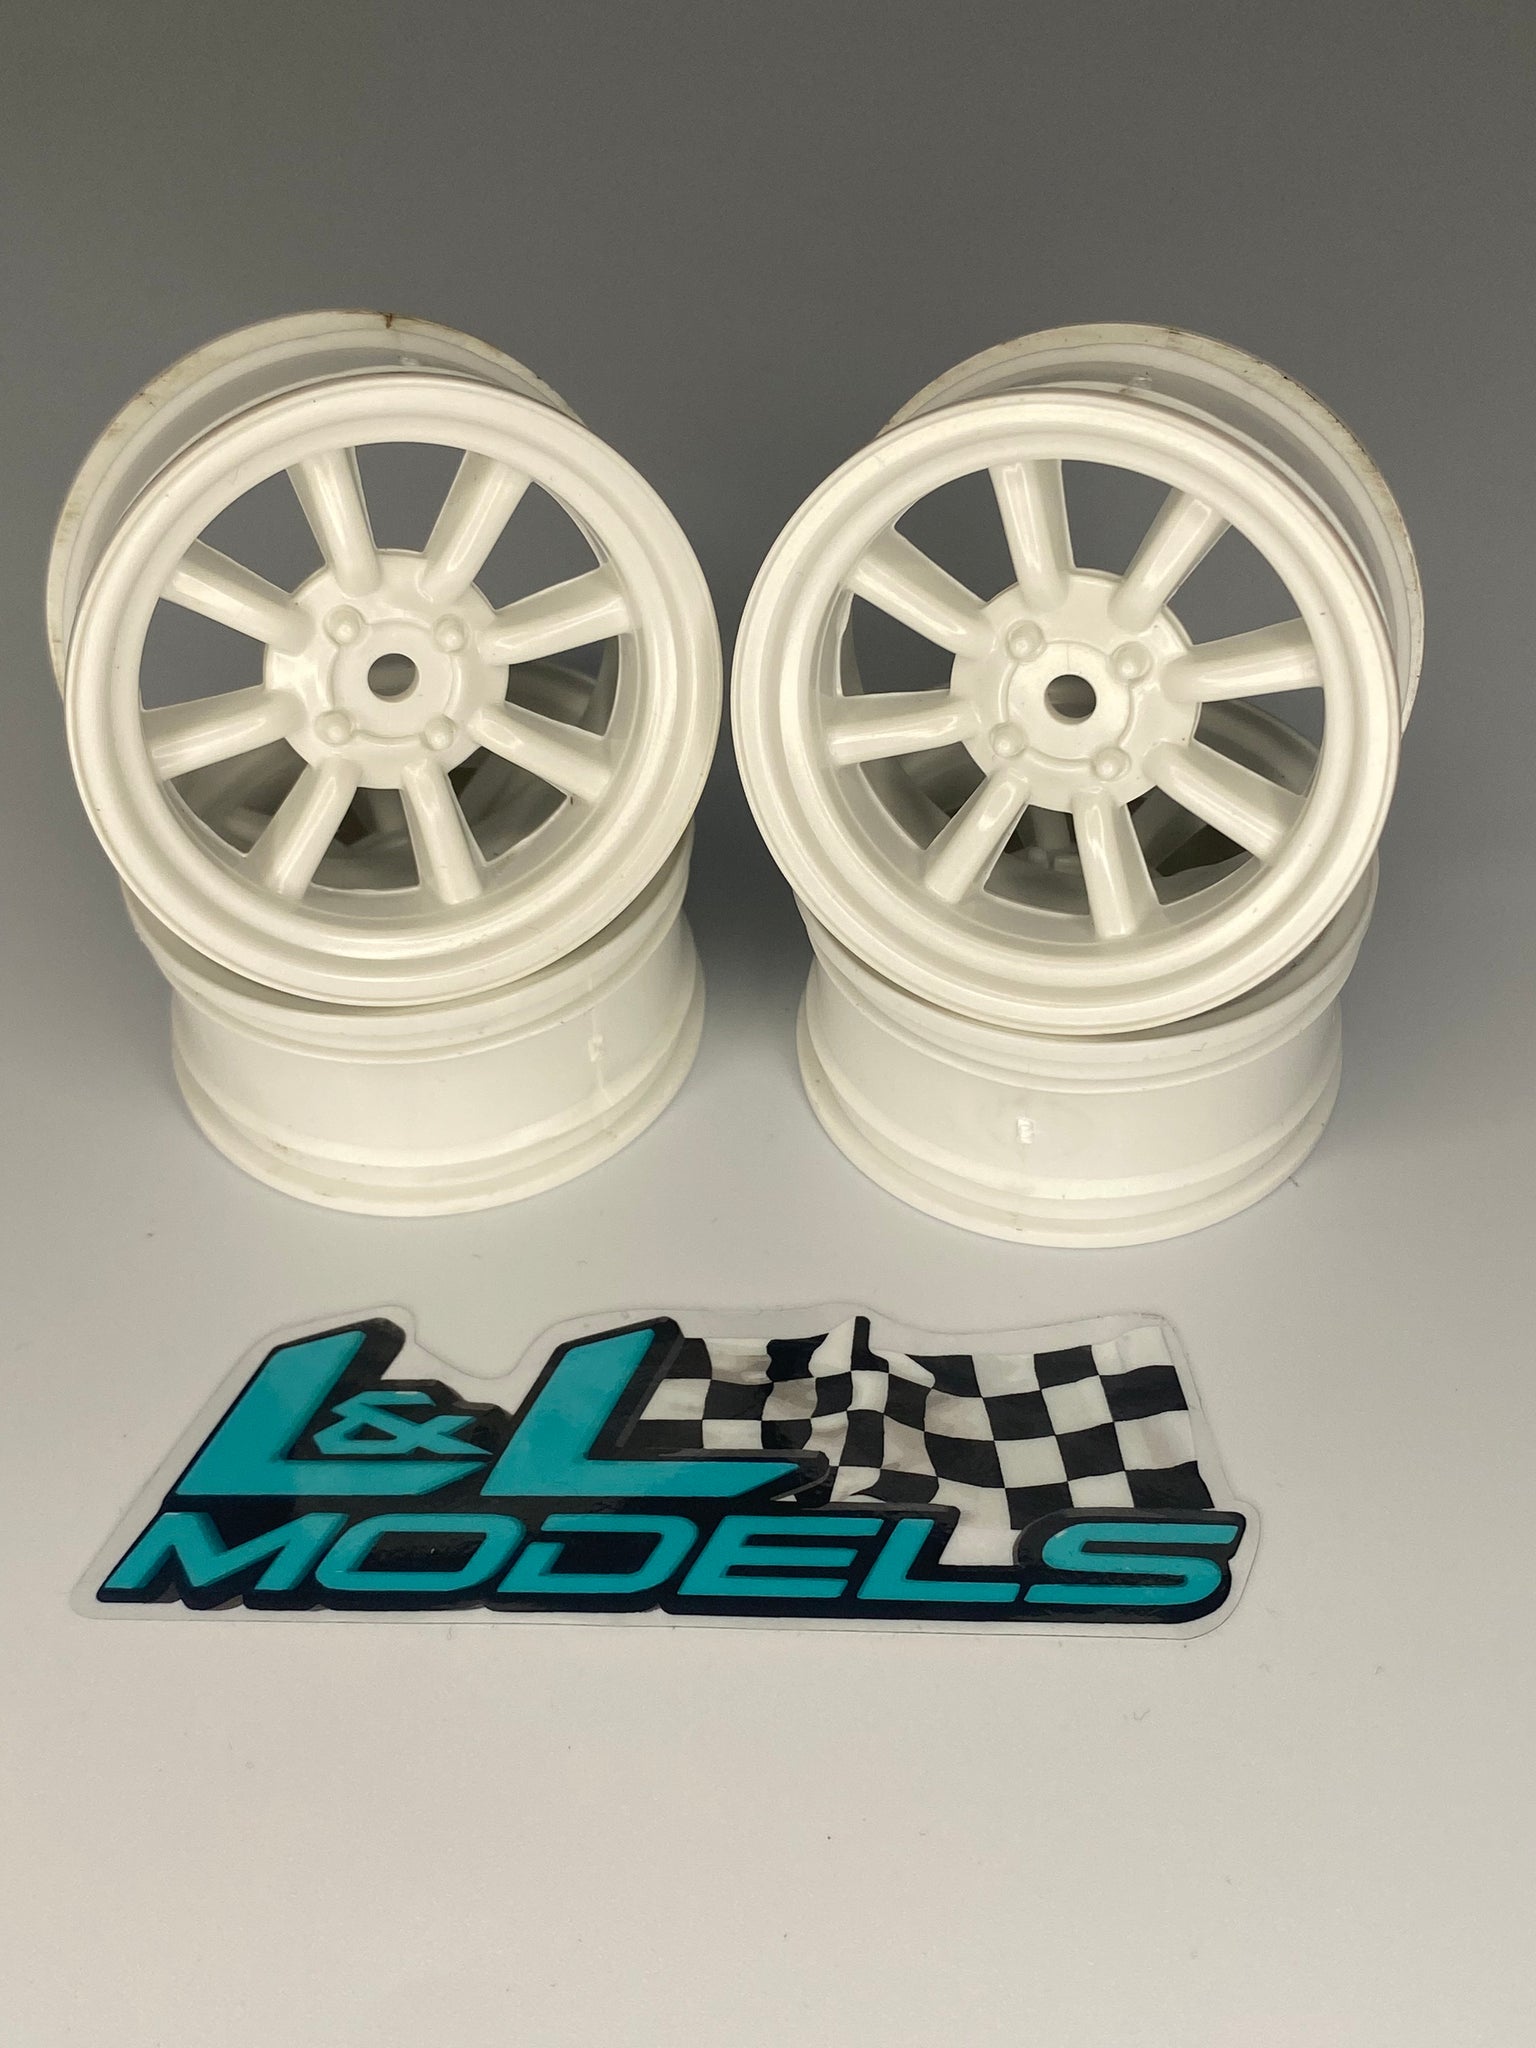 Minilite Ford Rs2000 White 3mm offset 26mm Rc Touring Car Wheels For Tamiya TT01 TT02 HPI Kyosho 12mm Hex Not M Chassis lg066w